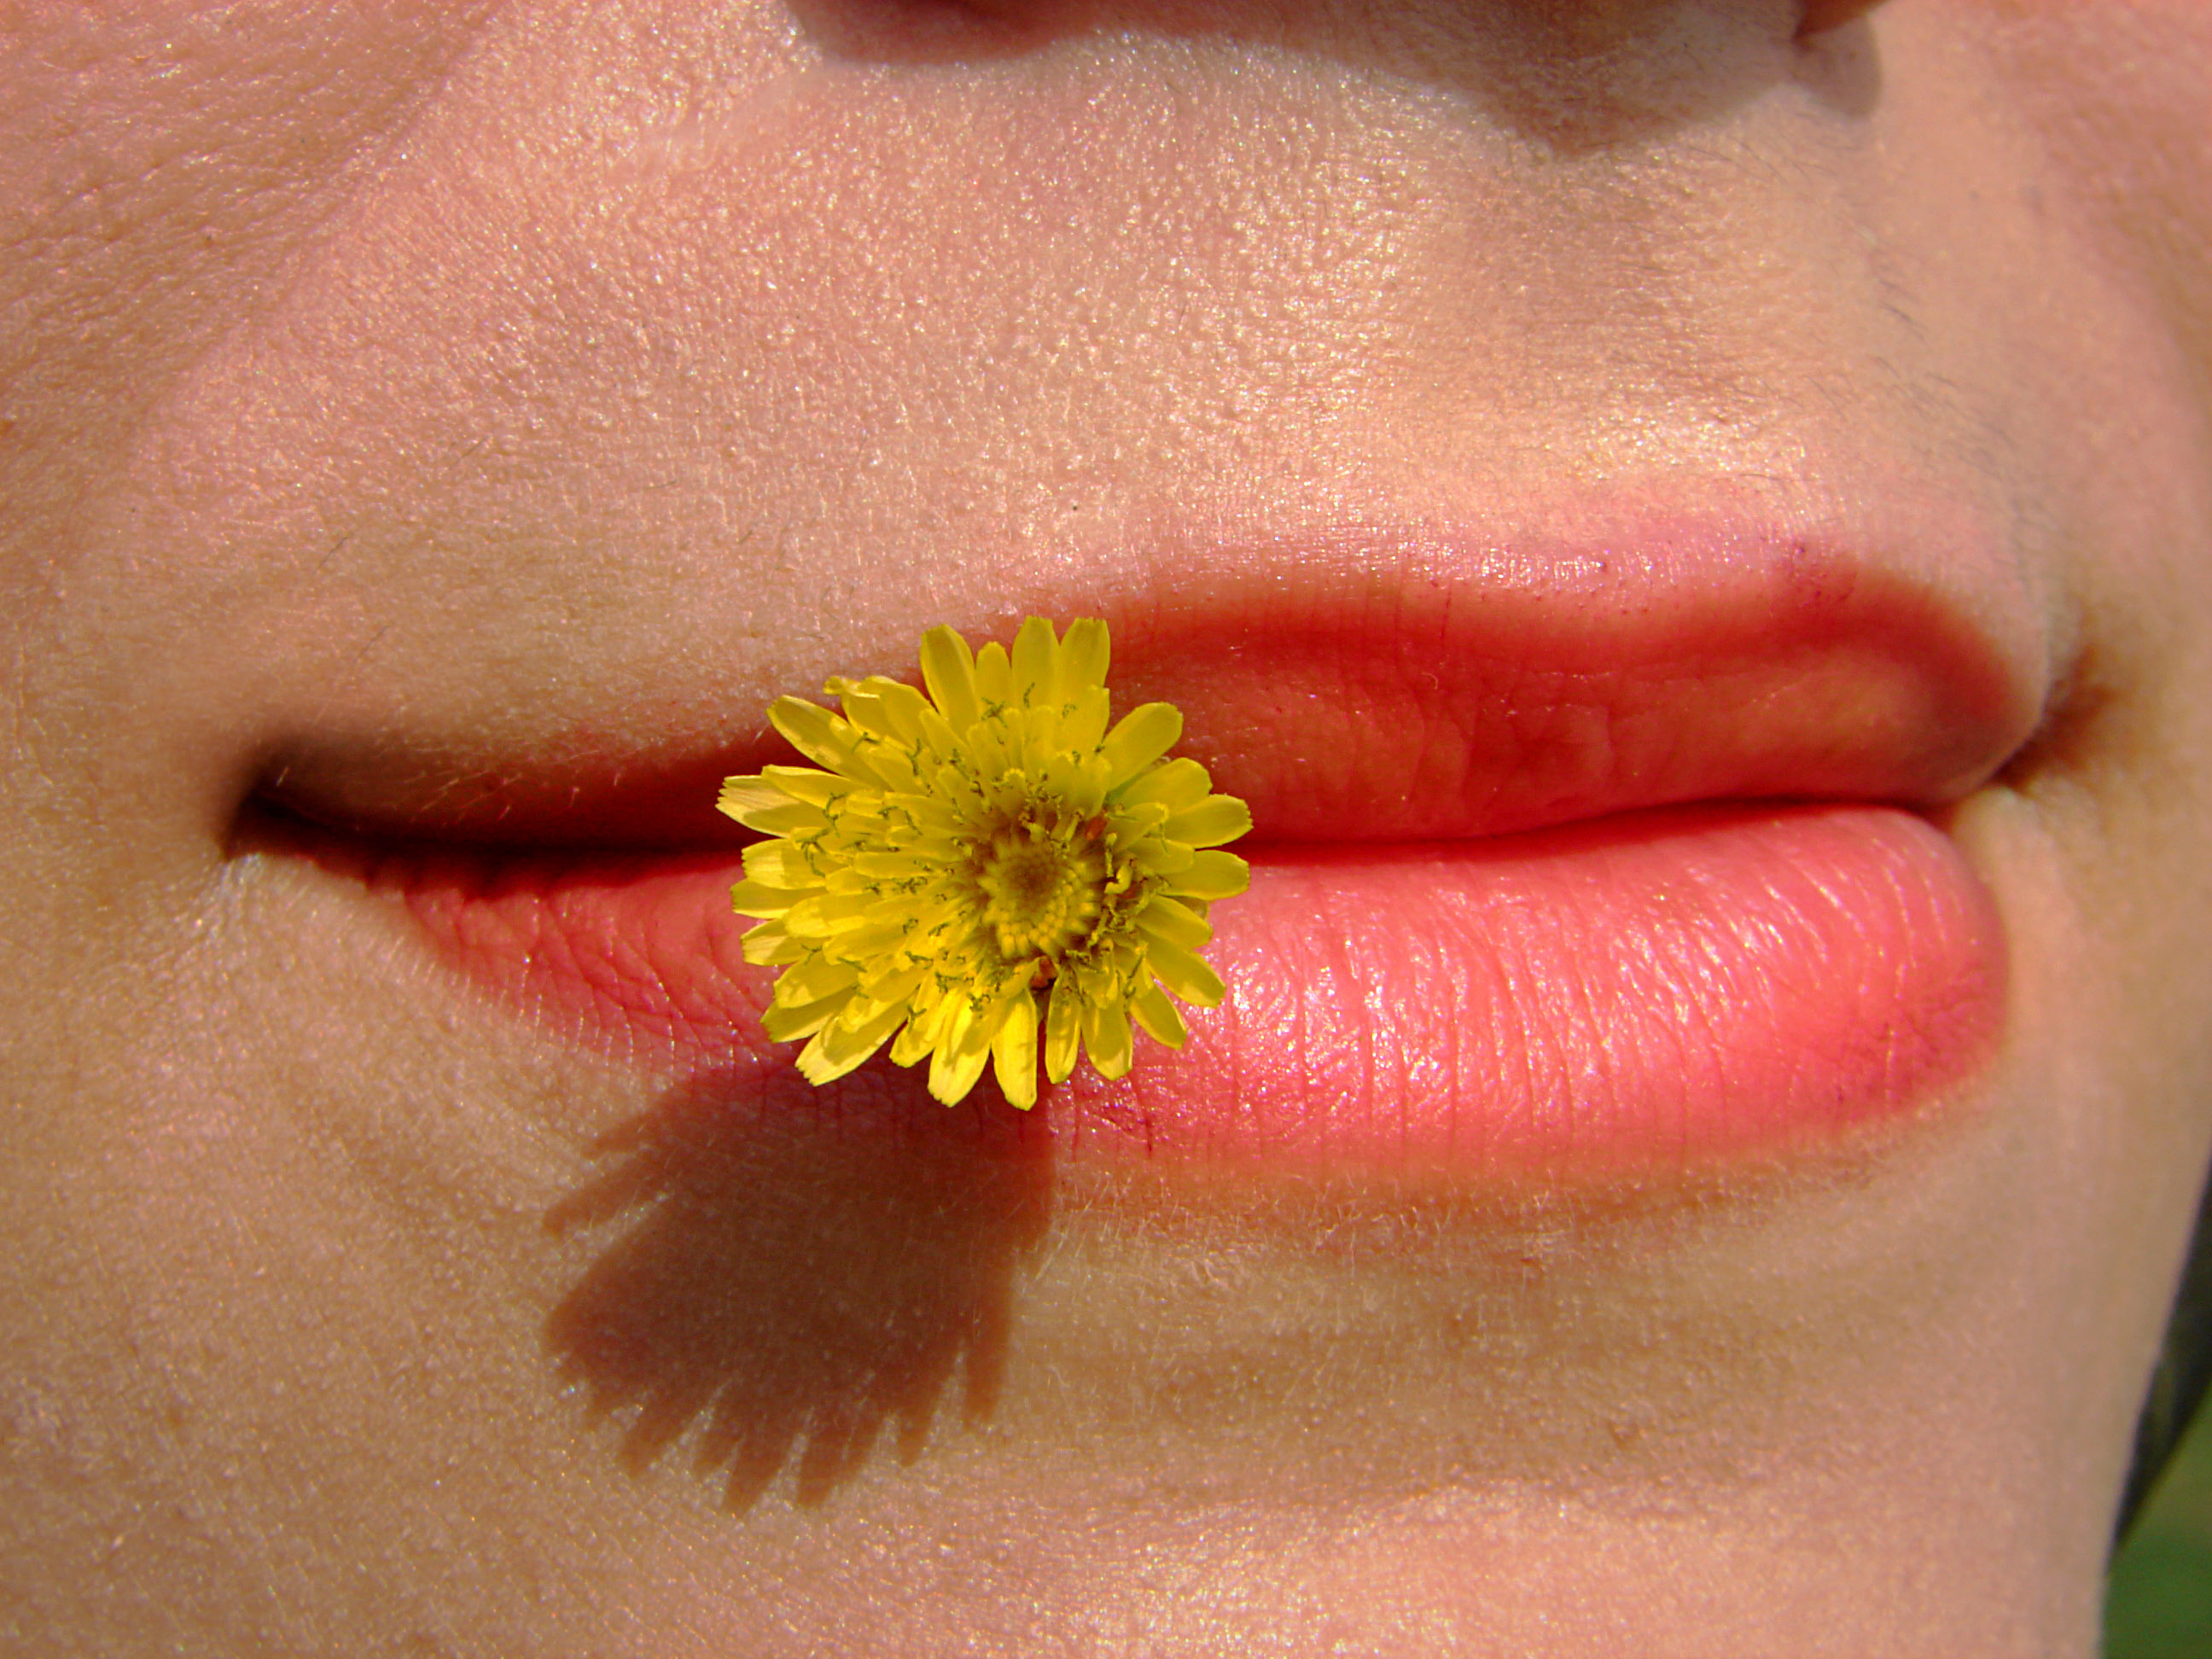 Wallpapers yellow flower lips mouth on the desktop